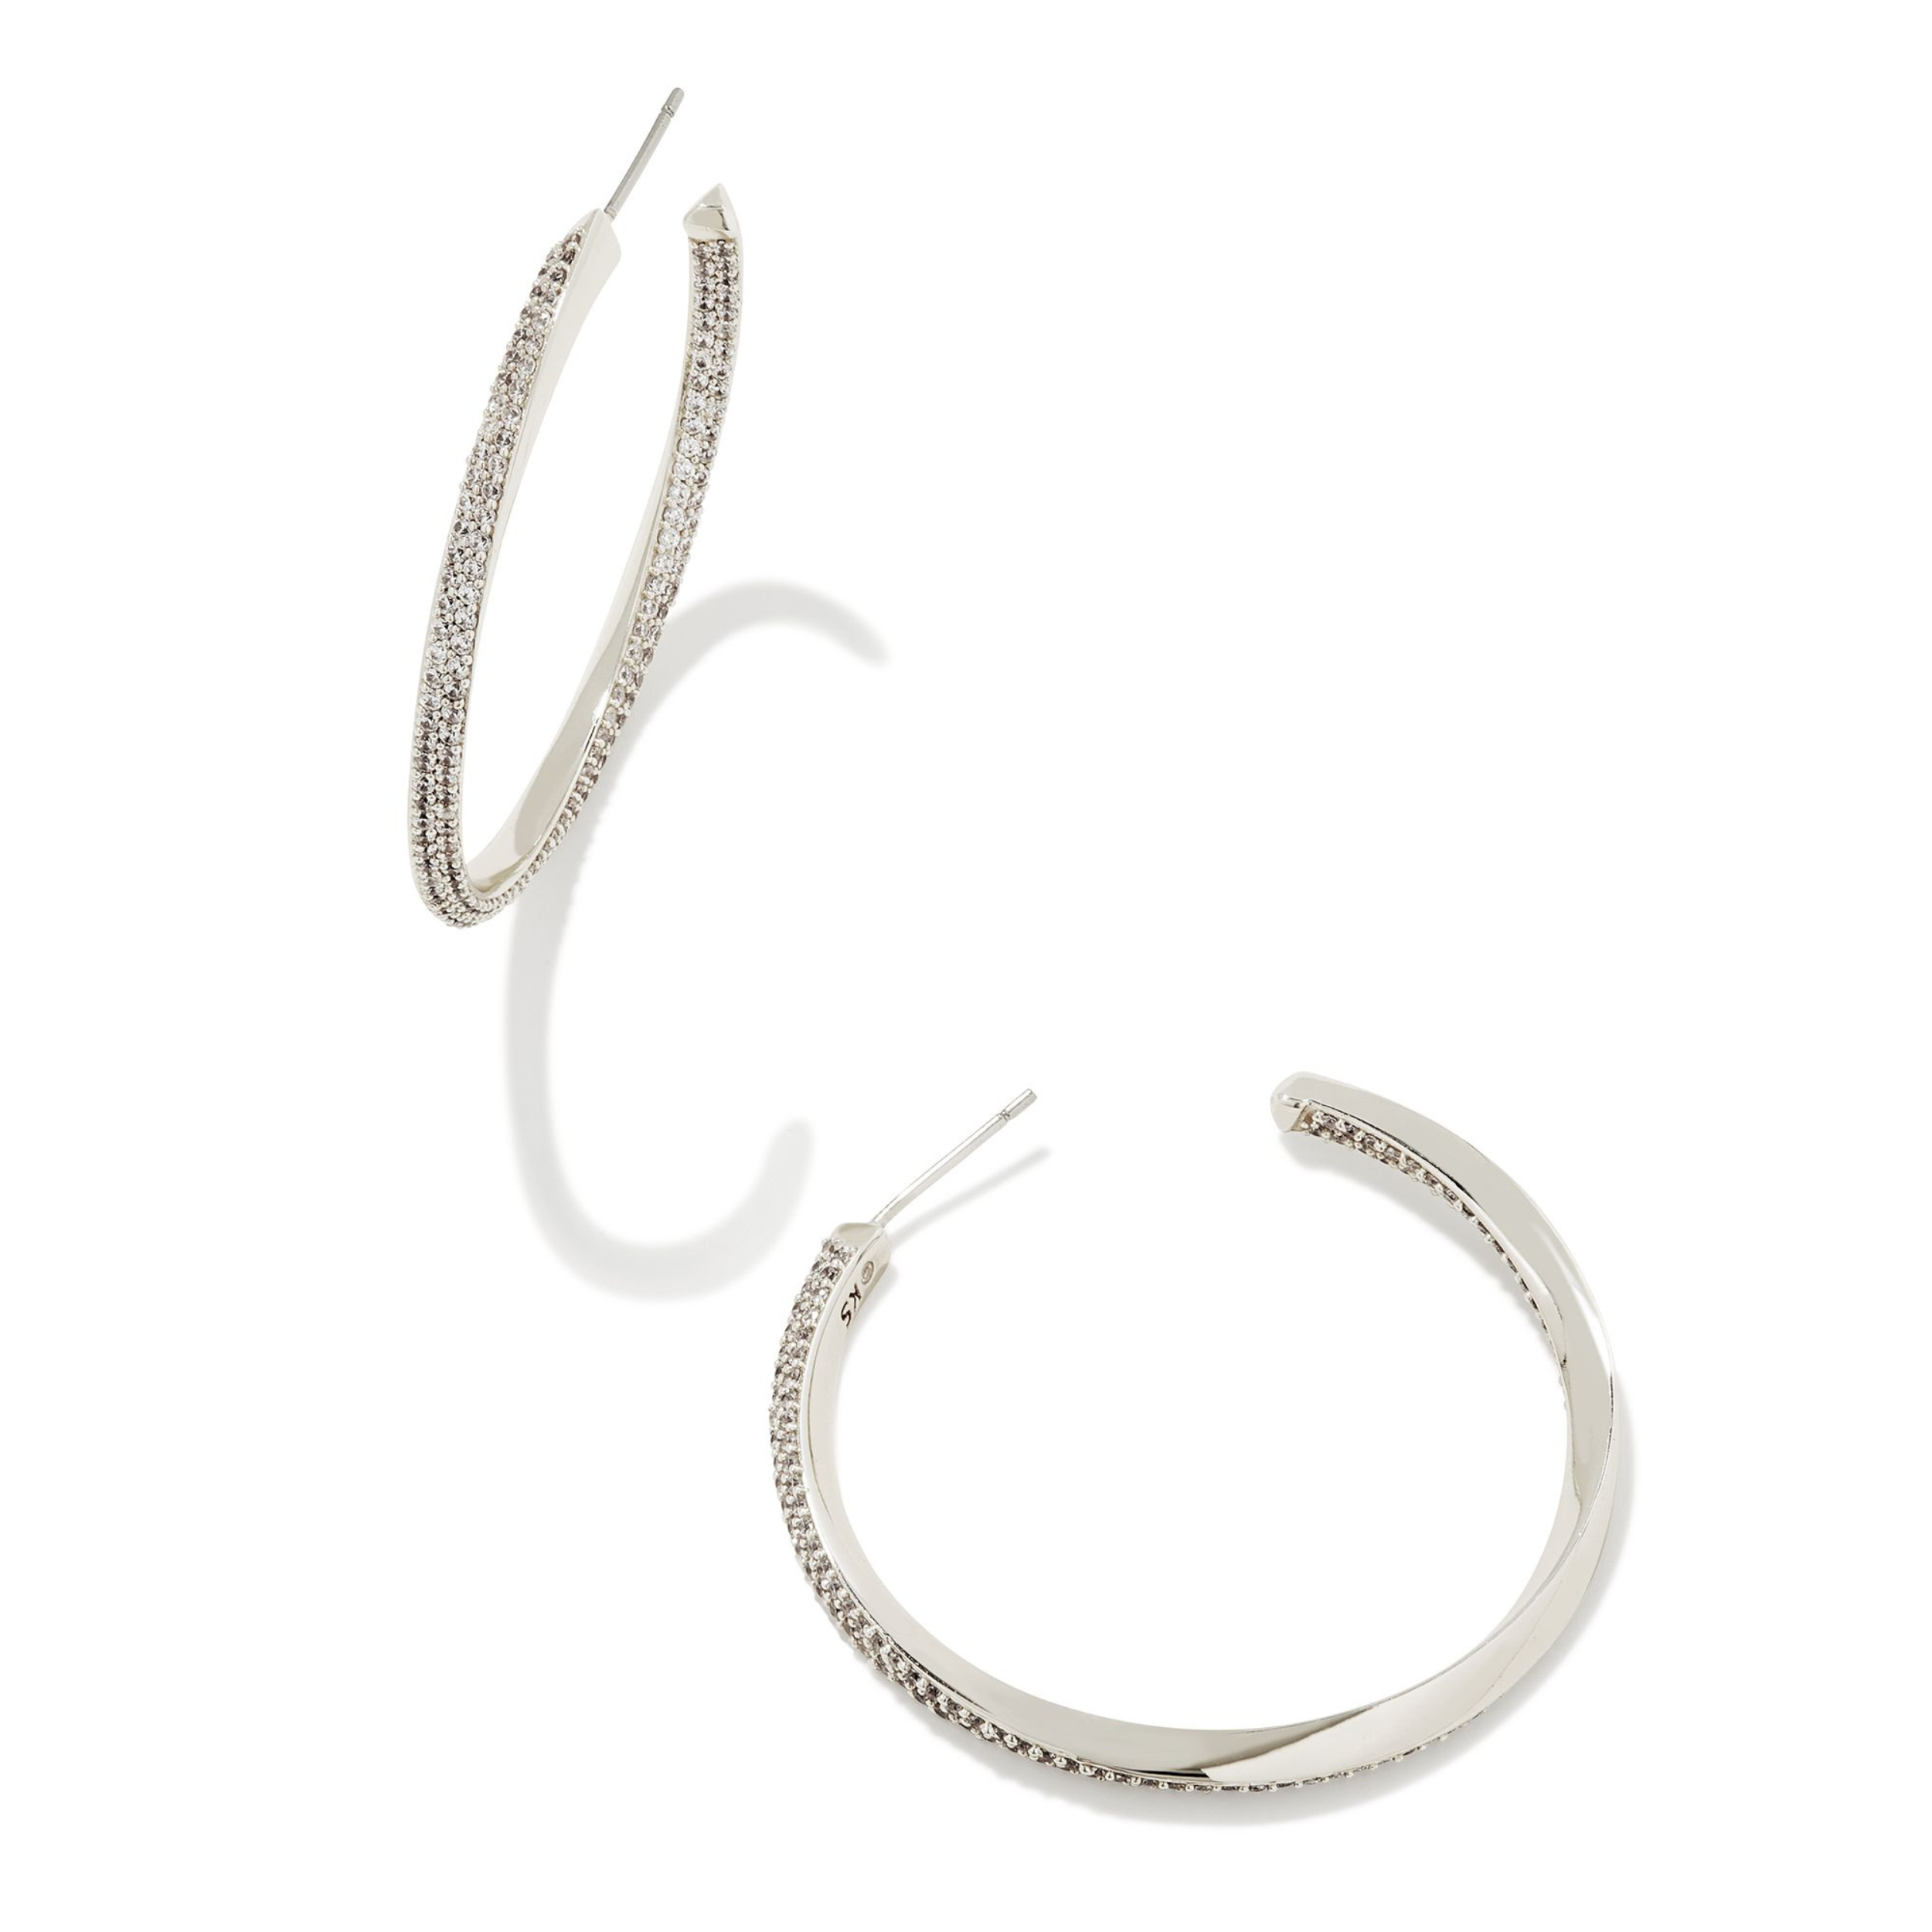 Silver hoop huggie twist earrings with cz crystals pictured on a white background. 